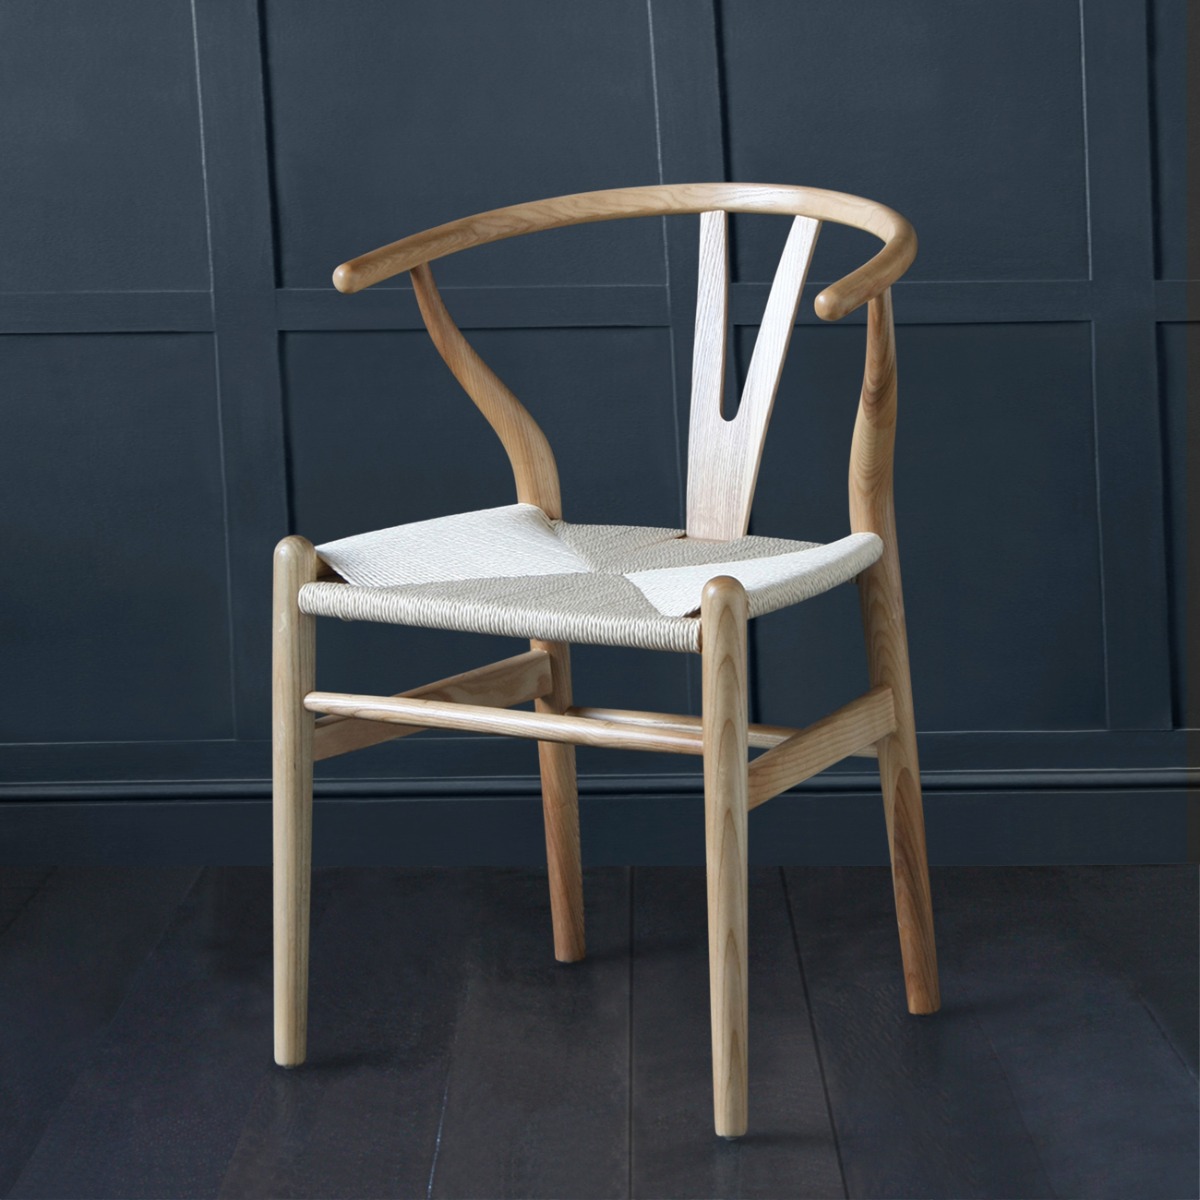 Hans Wegner chairs are great for continuing a Danish theme!